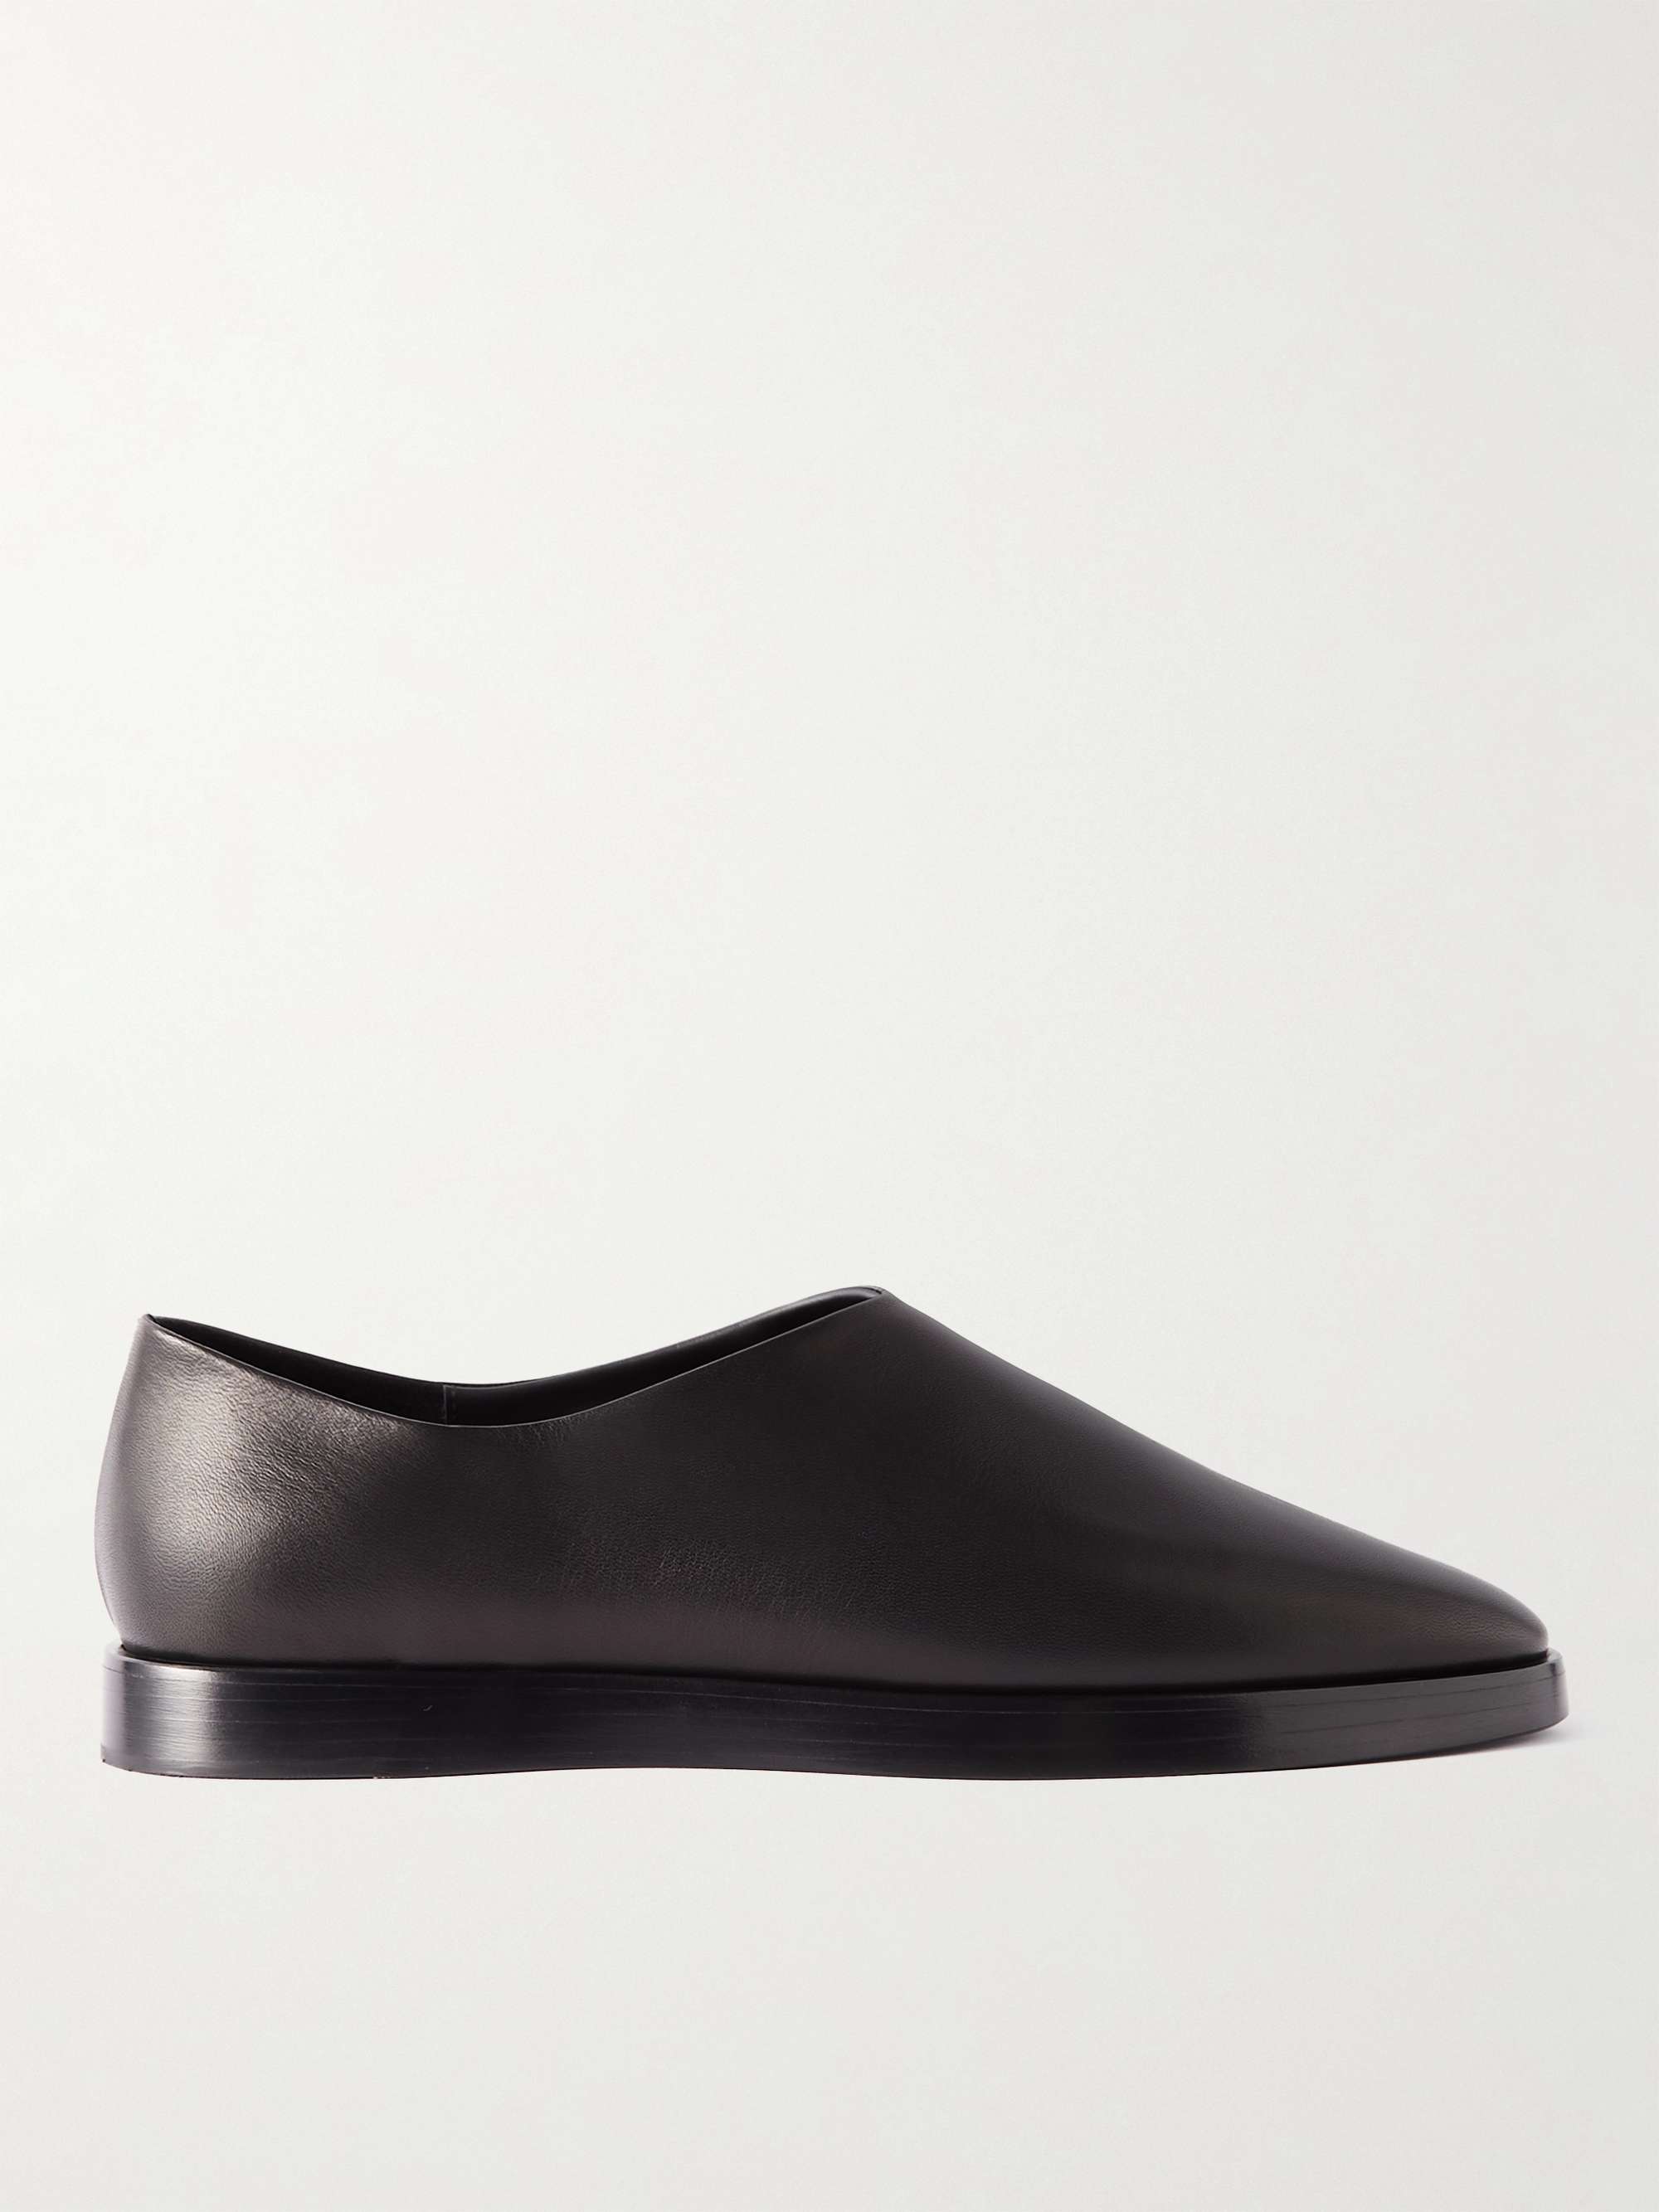 FEAR OF GOD Eternal Collapsible-Heel Leather Loafers